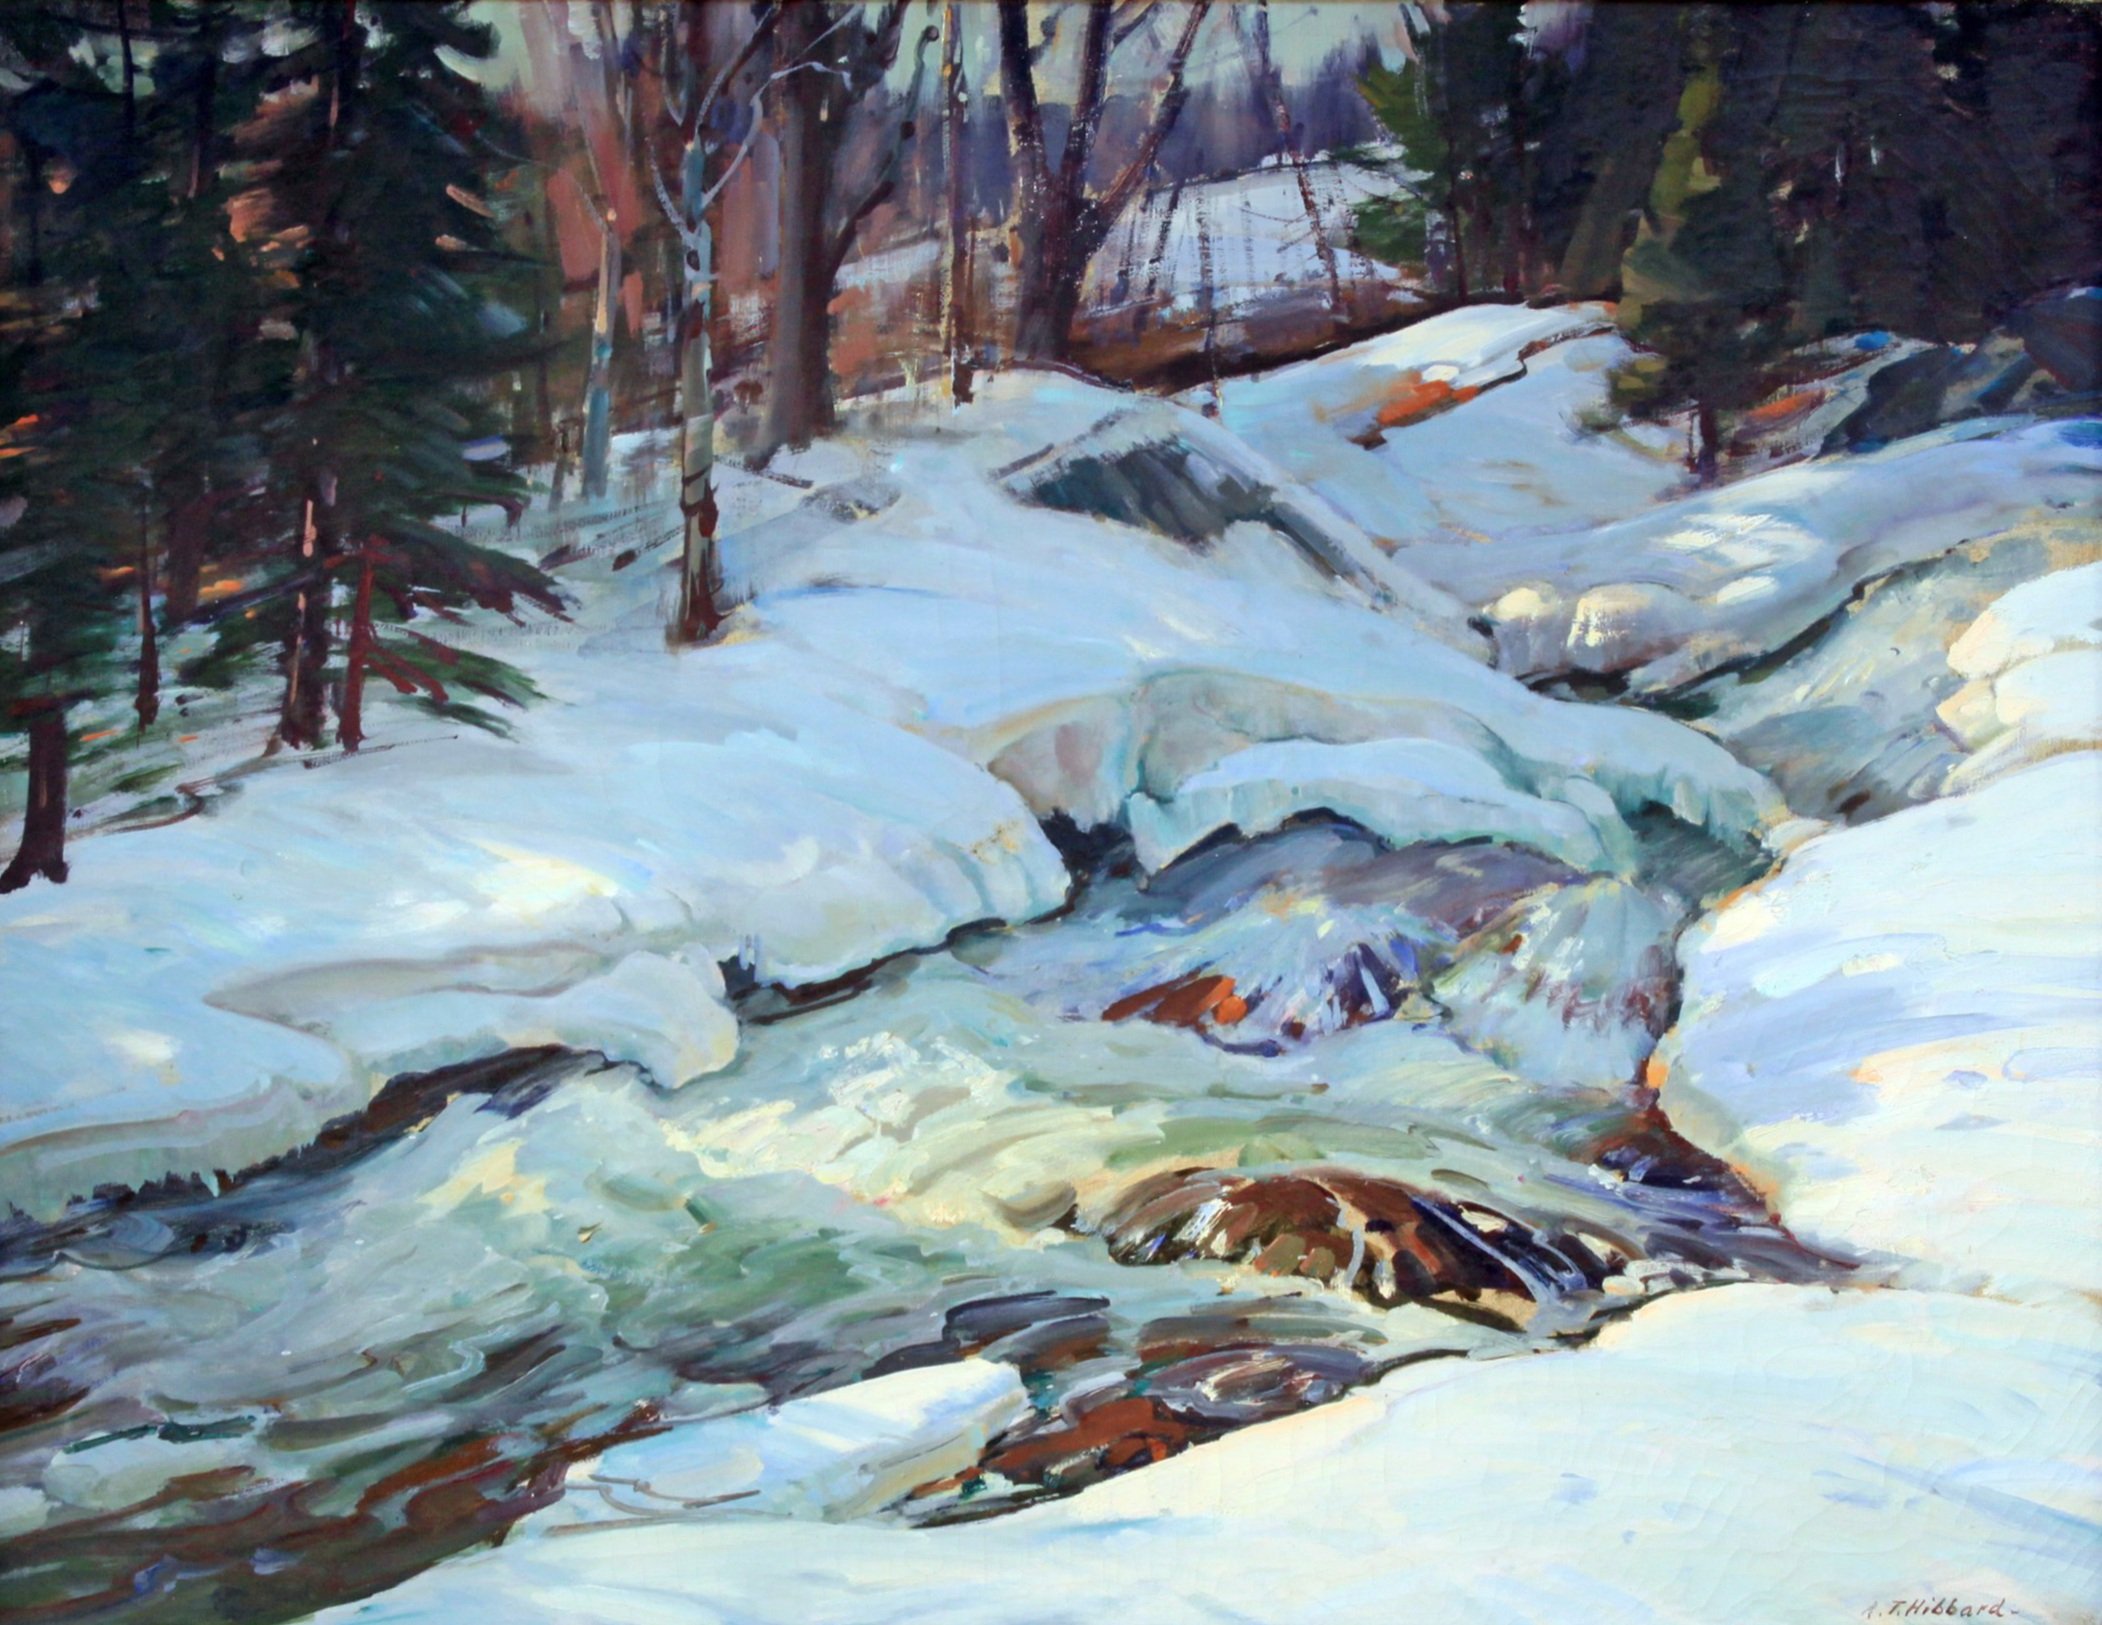  Feature Consignment:  Lot 147 - Aldro T. Hibbard (1886-1972)   Rushing Brook  oil on canvas, 28 x 36 in. 